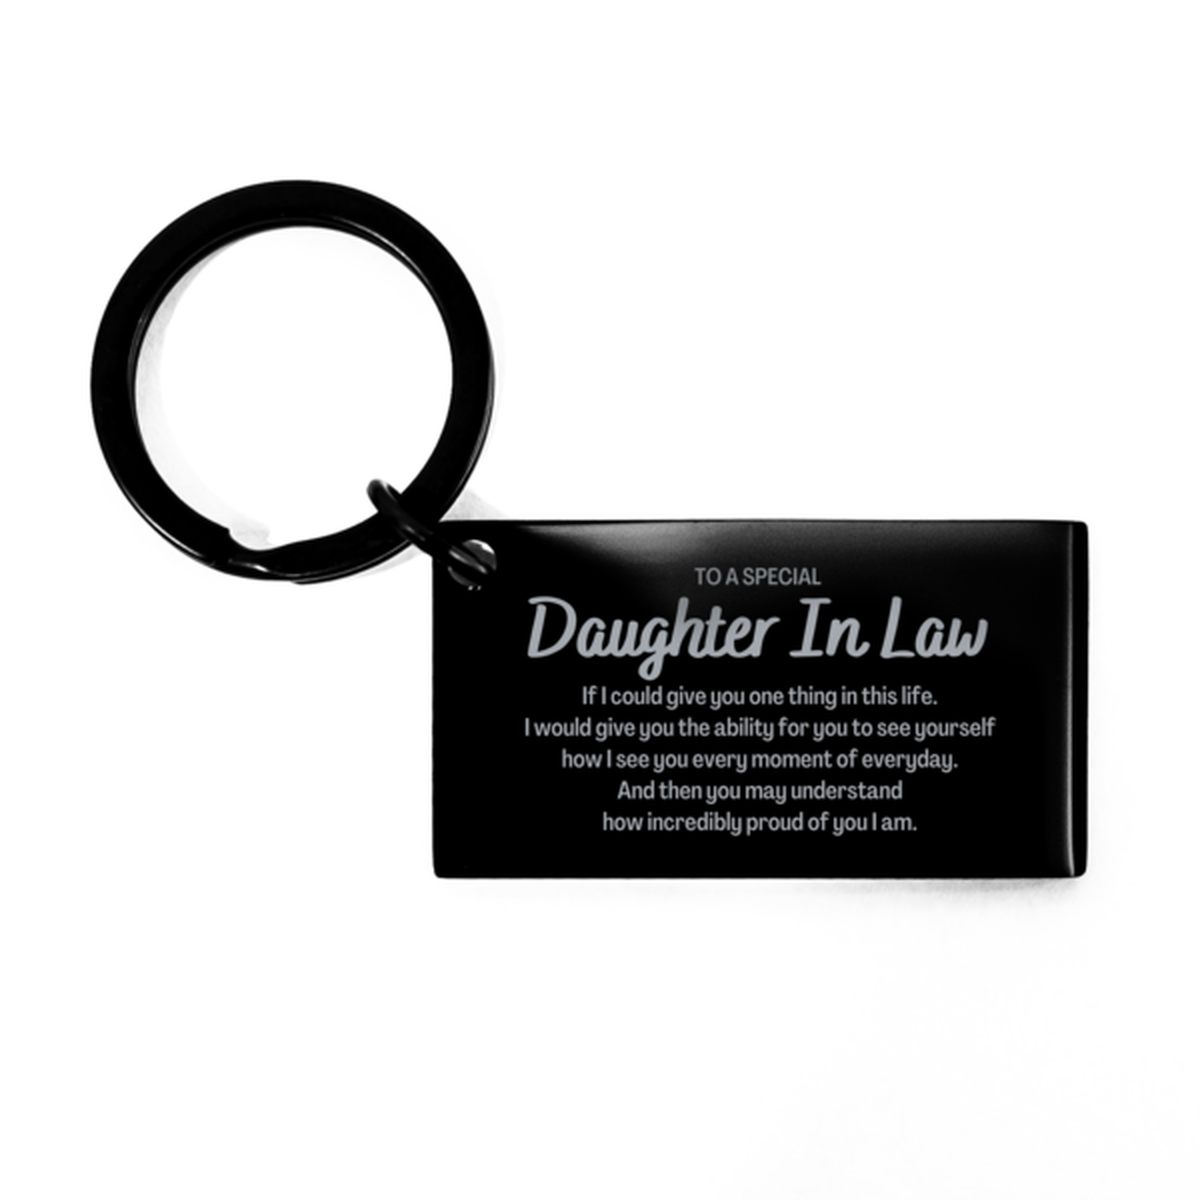 To My Daughter In Law Keychain, Gifts For Daughter In Law Engraved, Inspirational Gifts for Christmas Birthday, Epic Gifts for Daughter In Law To A Special Daughter In Law how incredibly proud of you I am